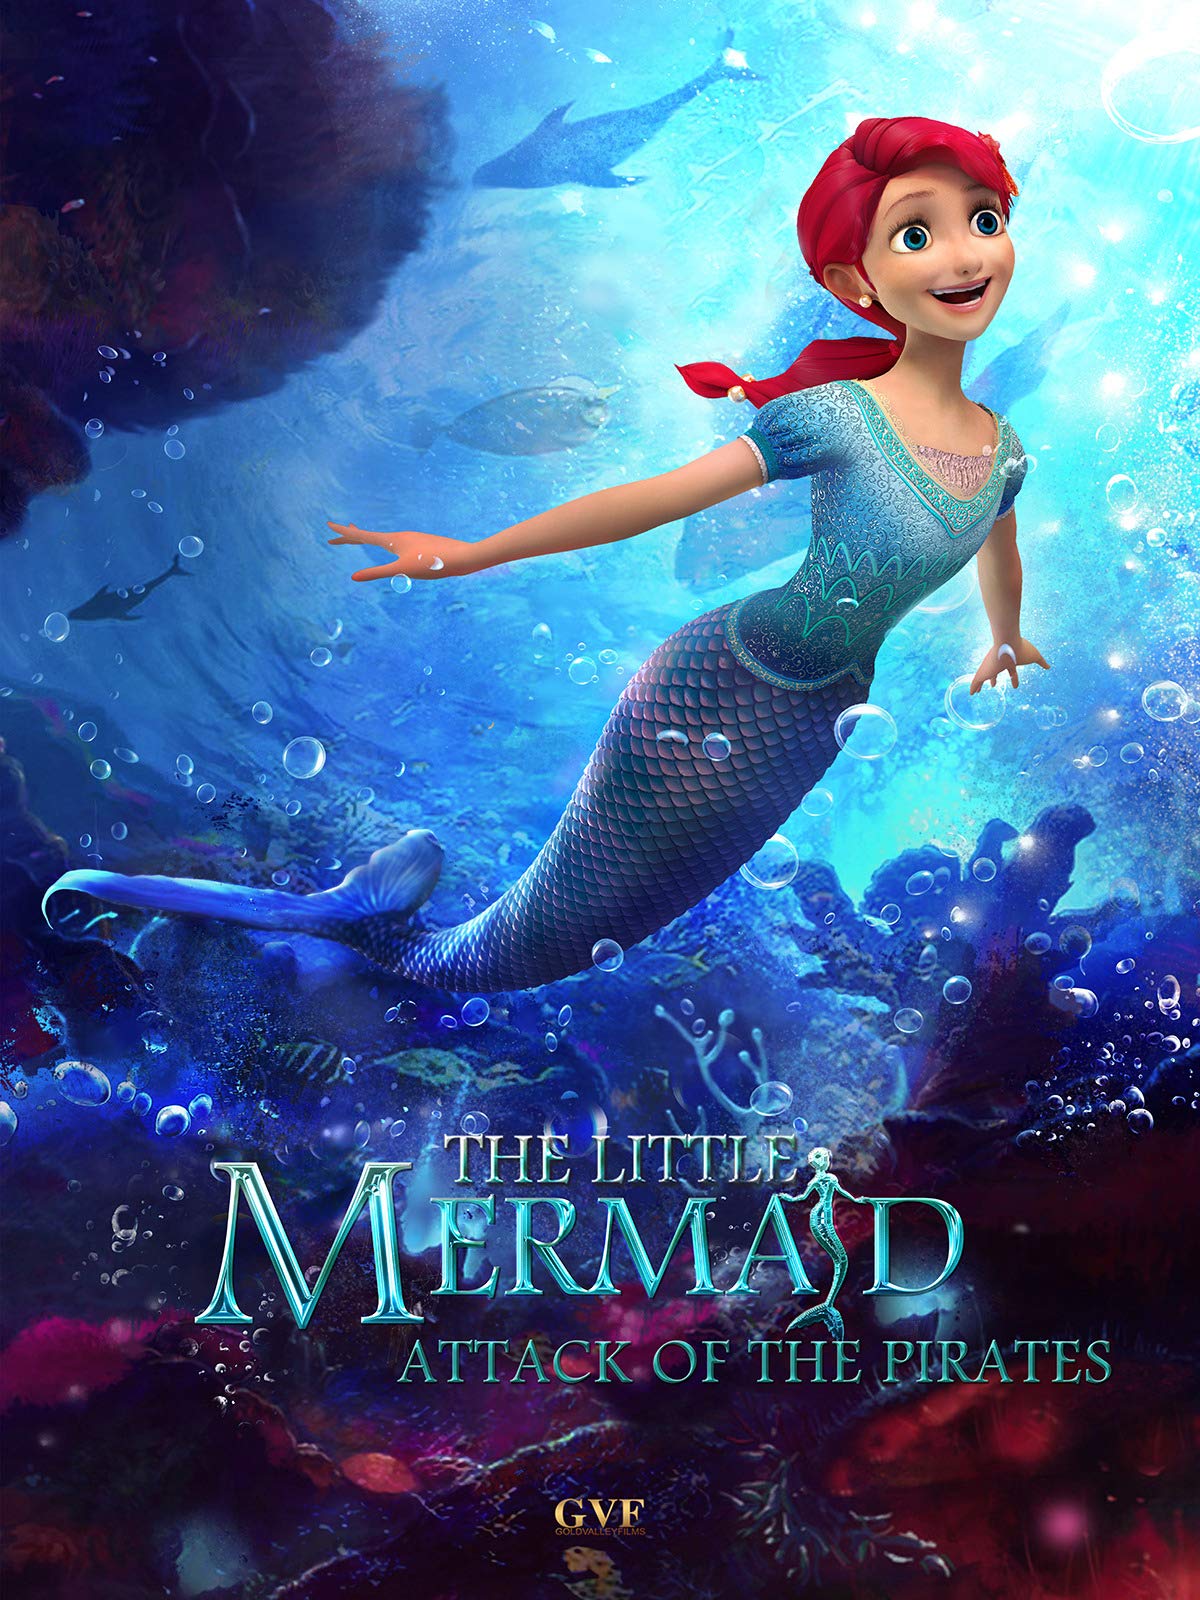 The Little Mermaid Attack of the Pirates 2015 Dual Audio Hindi ORG 720p HDRip ESub 800MB Download